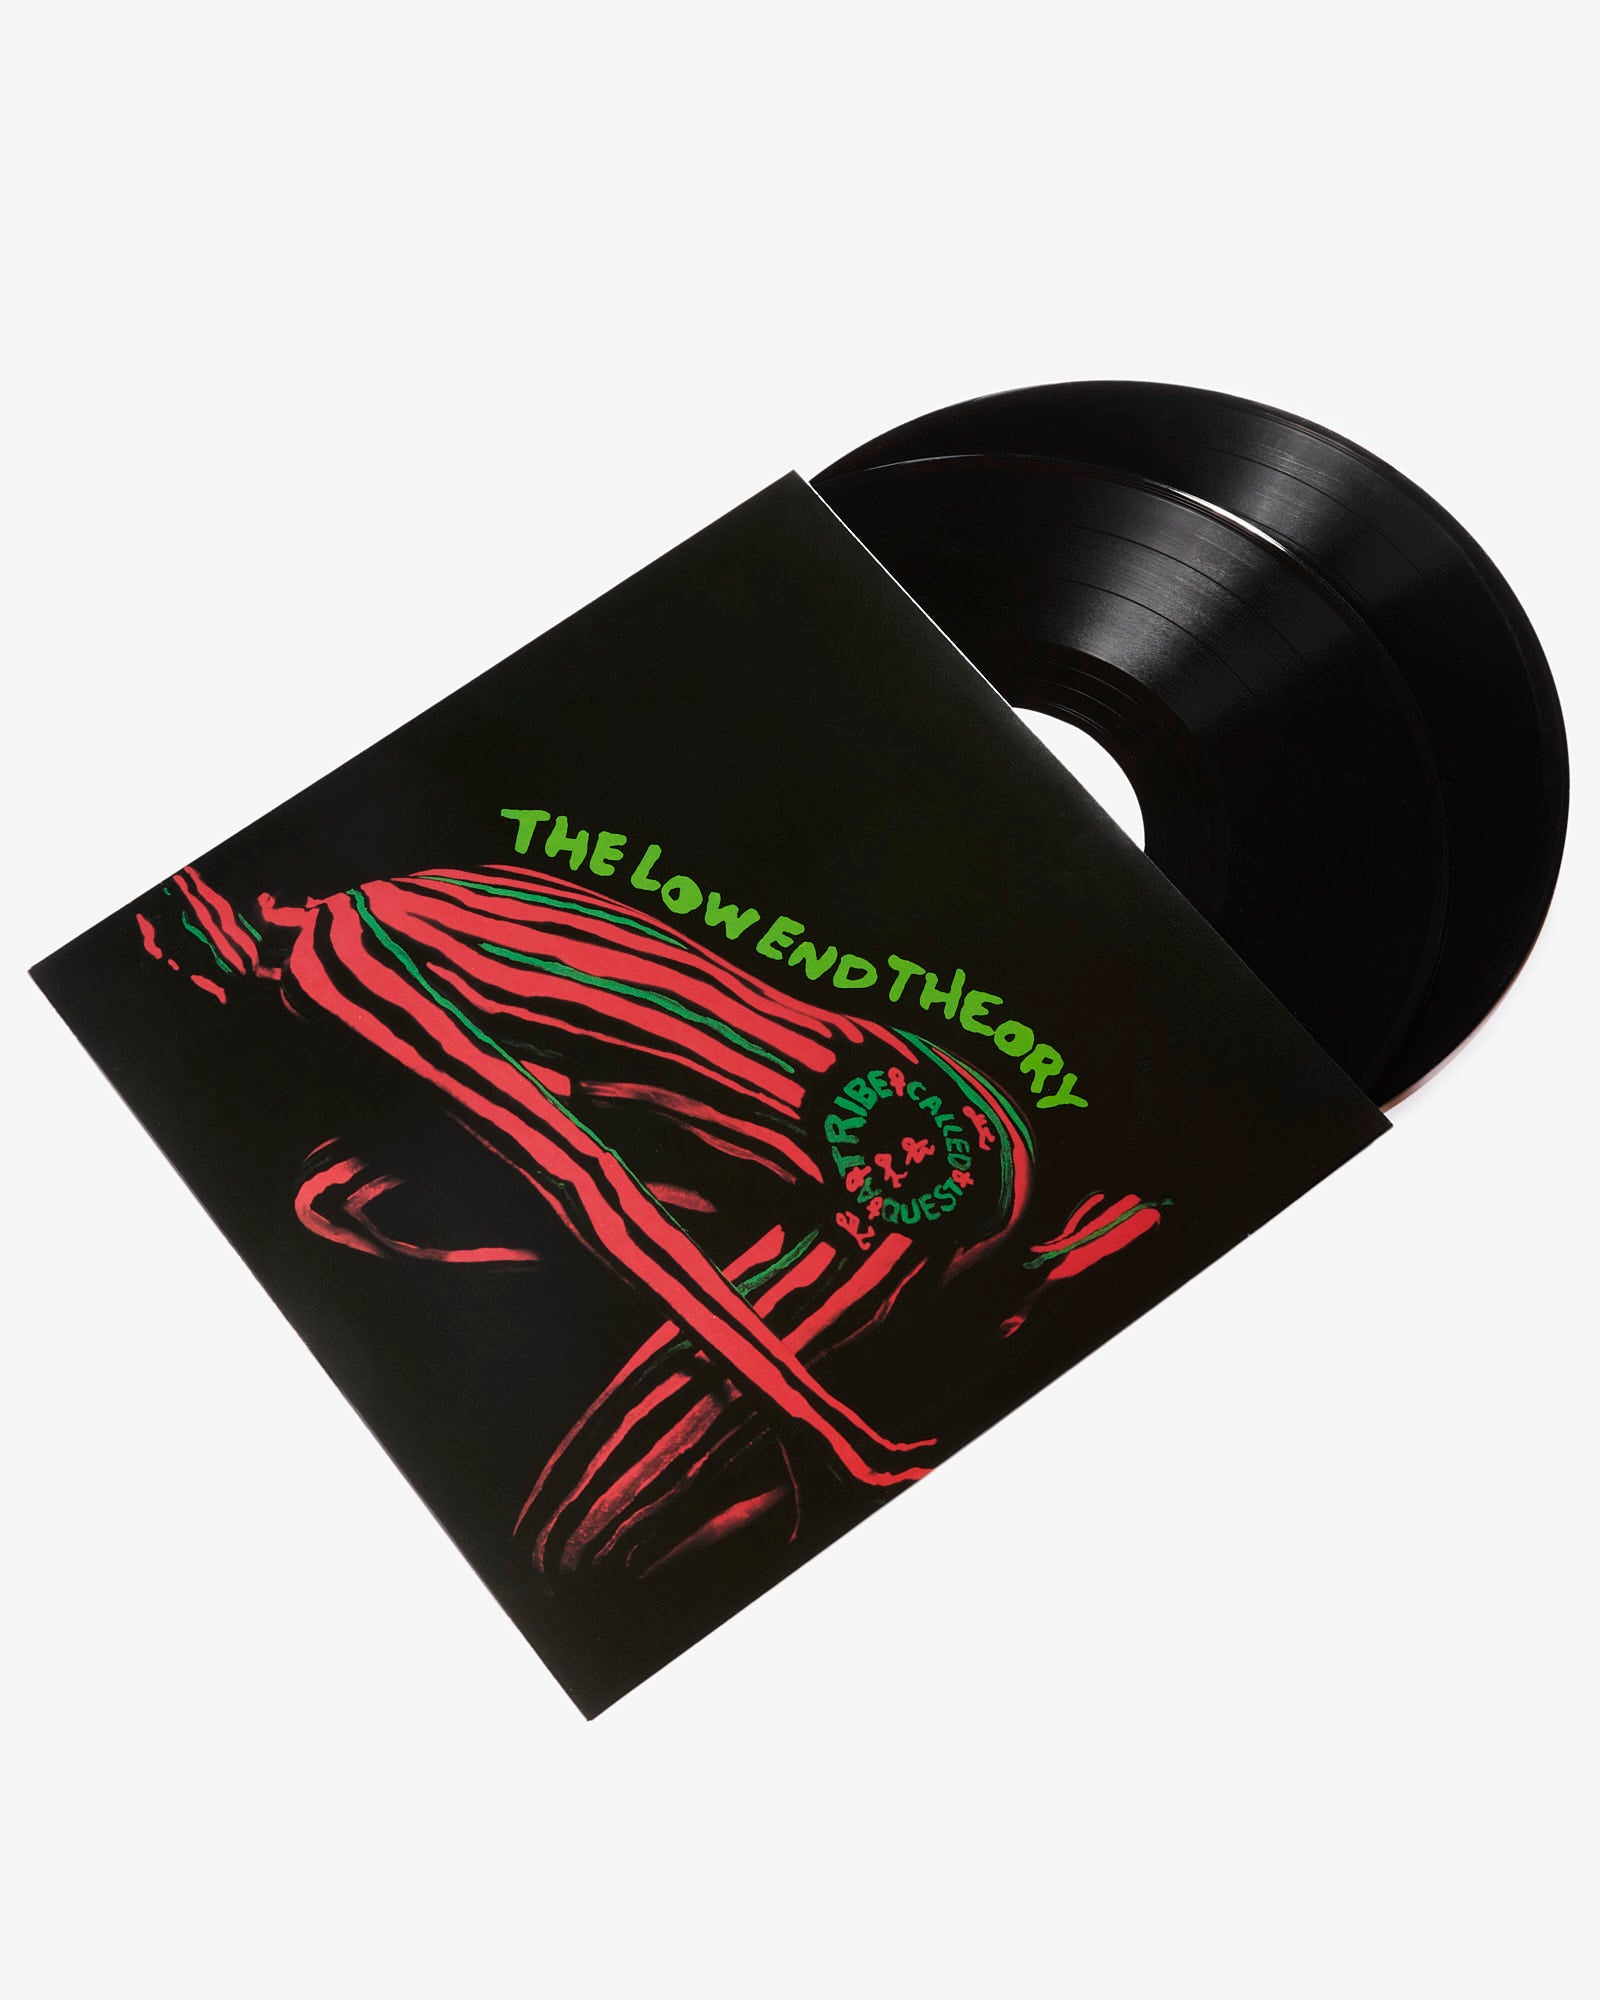 The Low End Theory Vinyl